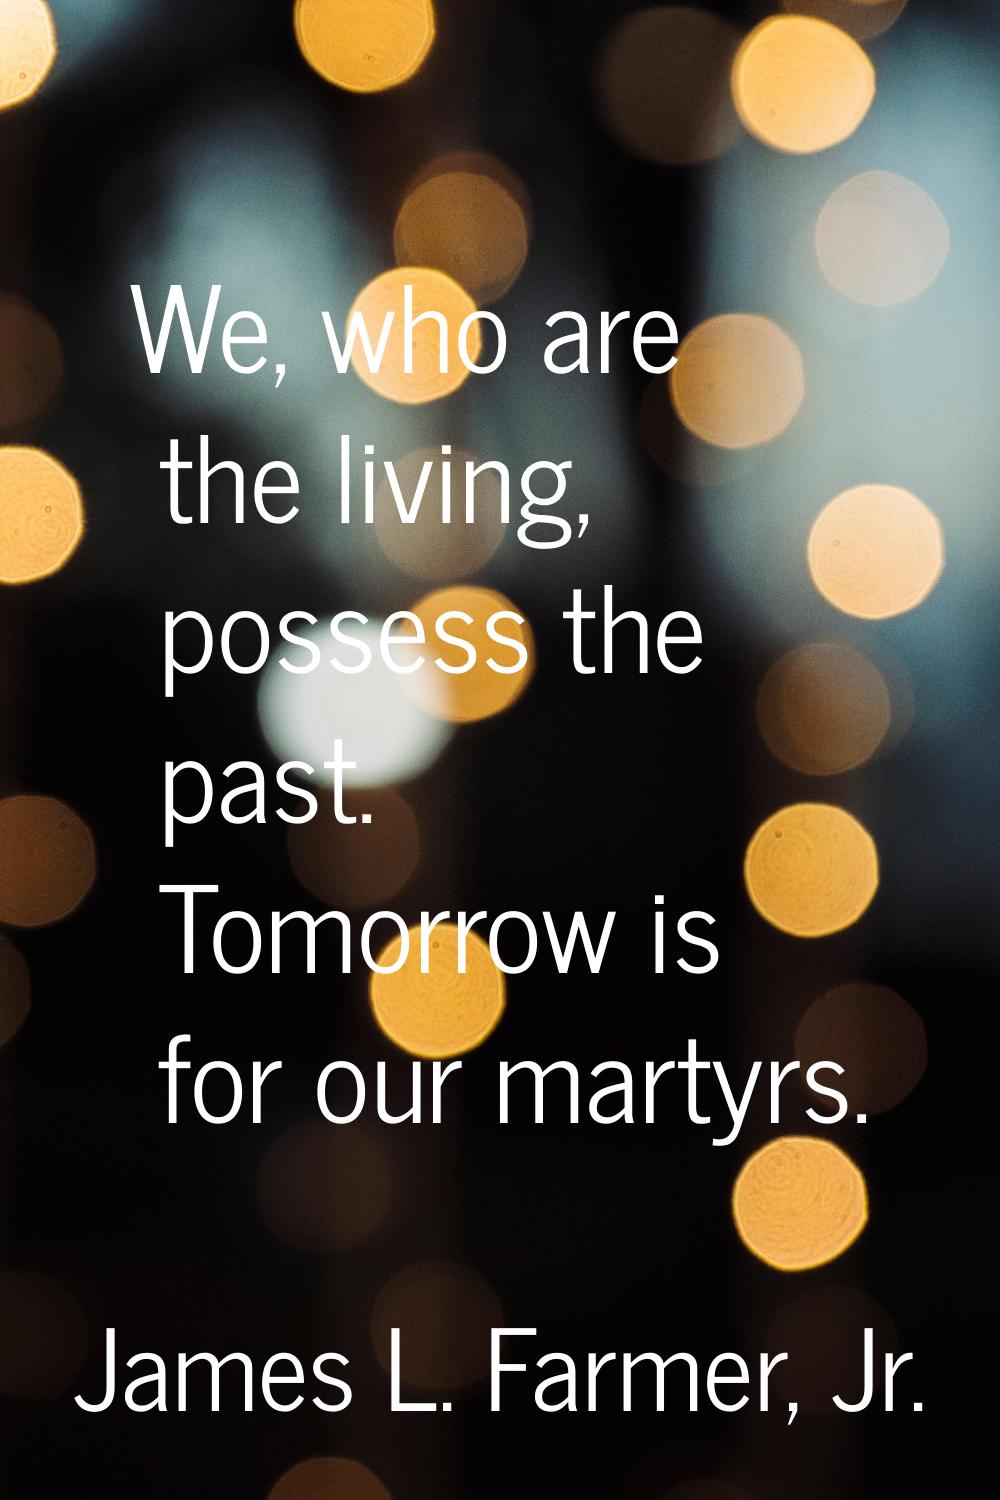 We, who are the living, possess the past. Tomorrow is for our martyrs.